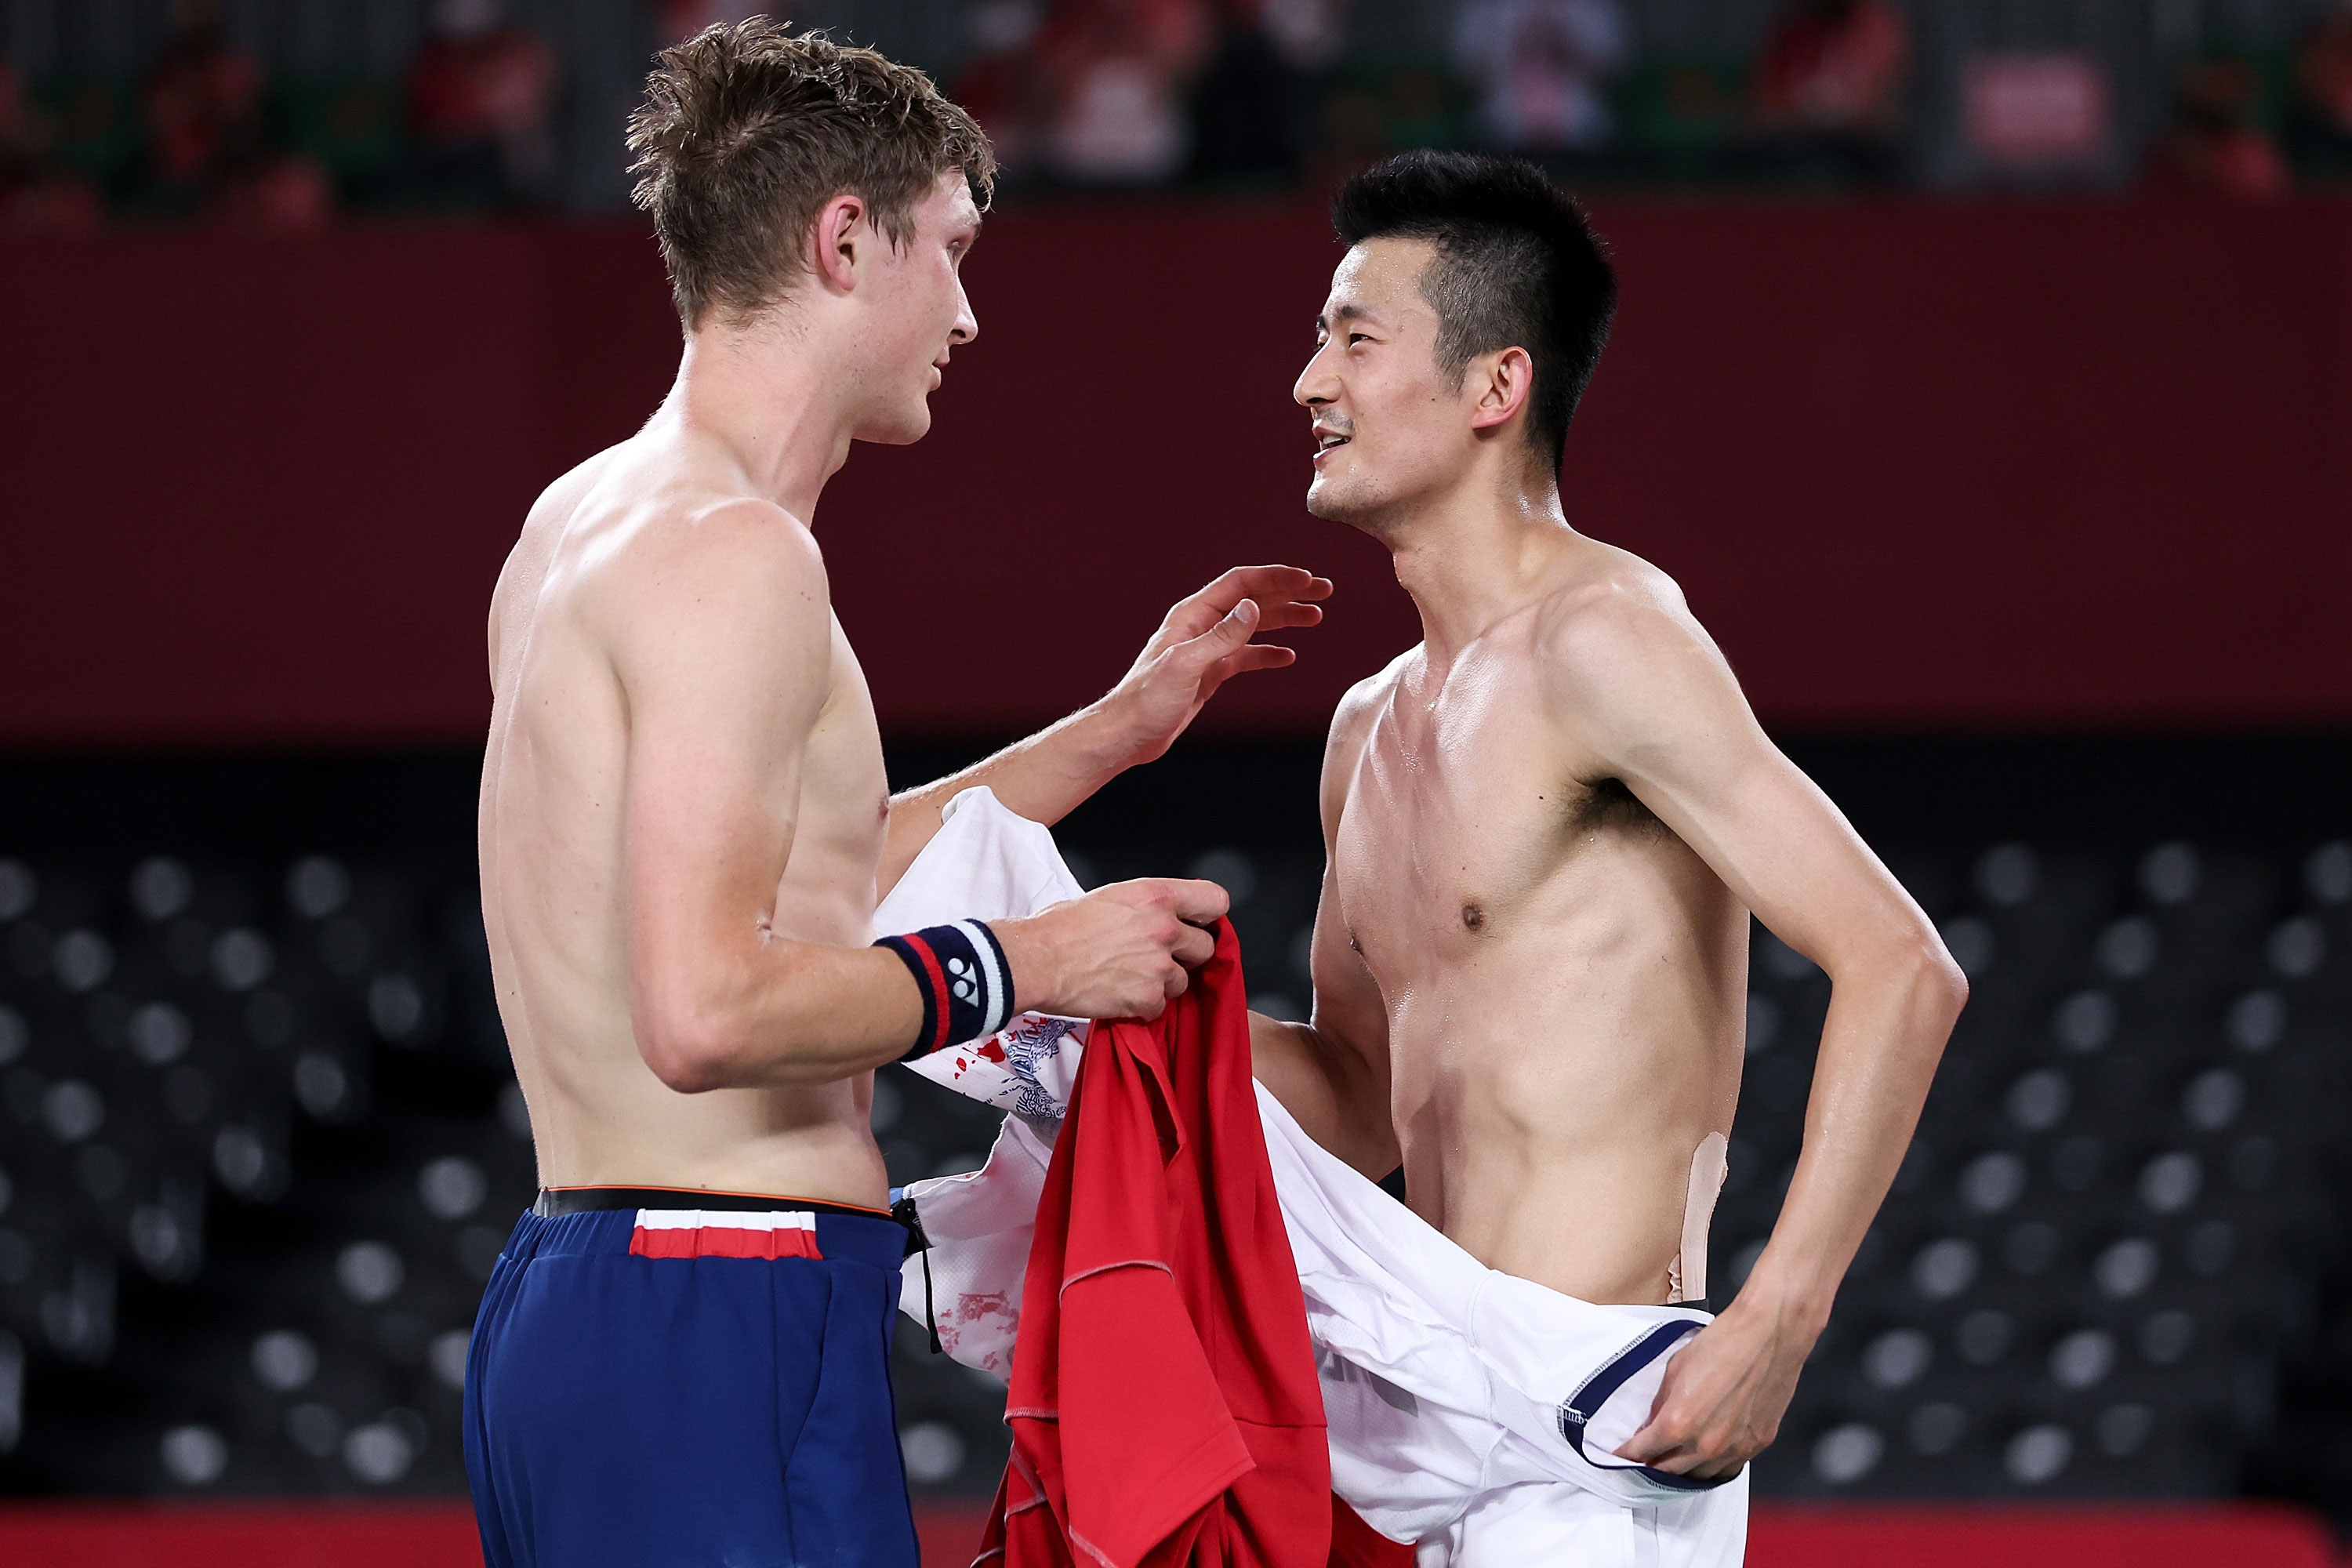 Viktor Axelsen of Denmark, left, speaks with Chen Long of China after their badminton singles final on August 2.